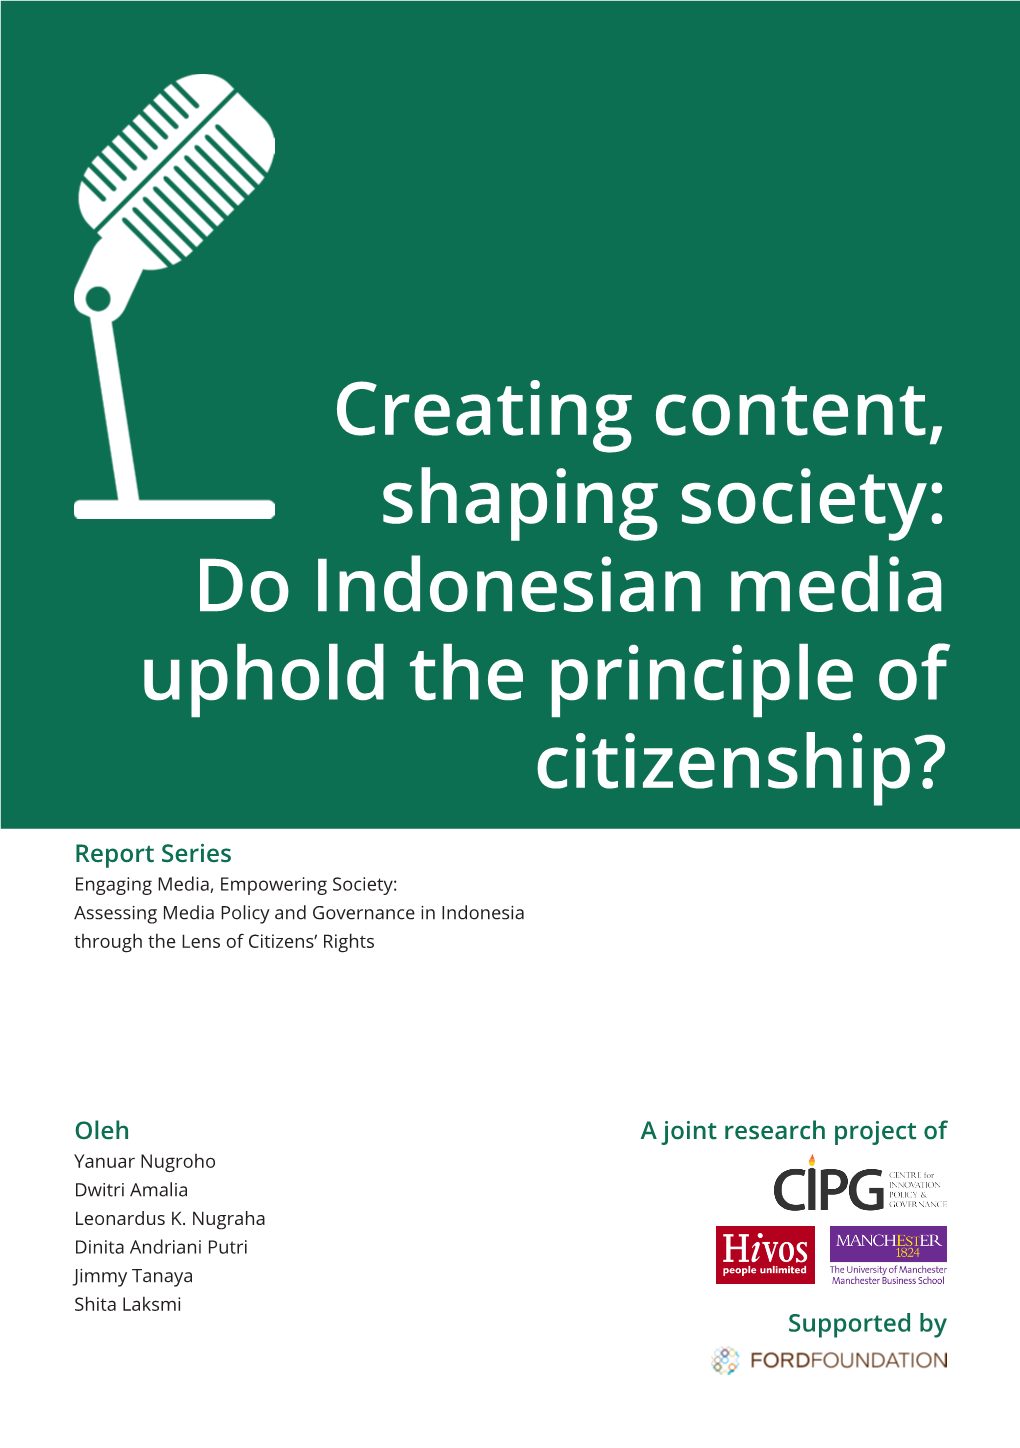 Creating Content, Shaping Society: Do Indonesian Media Uphold the Principle of Citizenship?